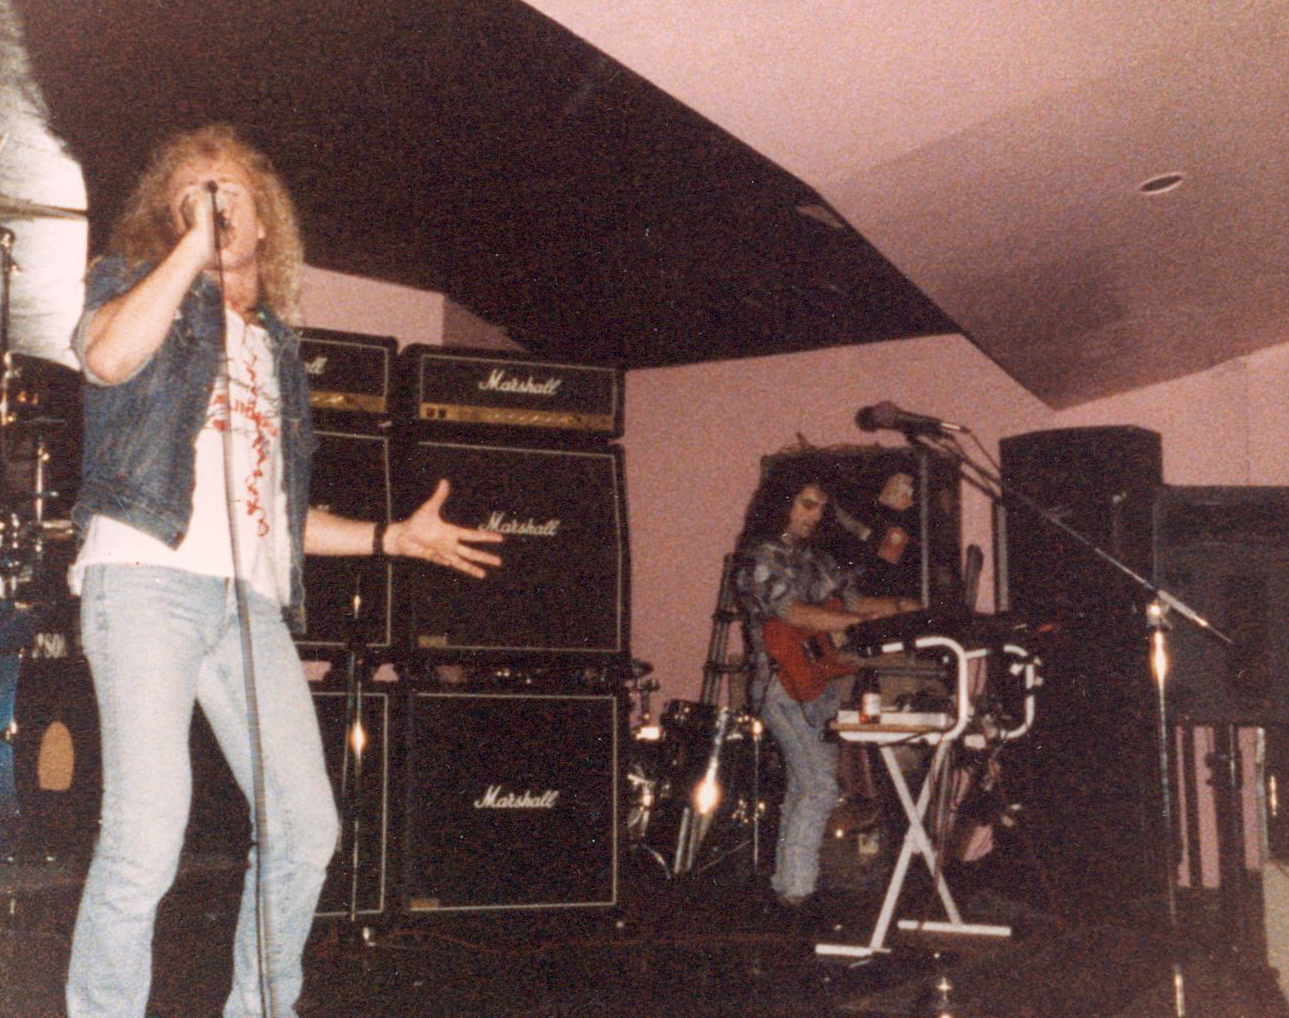 AMERICADE at rehearsals in Brooklyn, NY. Mark Weitz (left, vocals) and Gerard de Marigny (right, guitar, keyboards) - c. 1989.